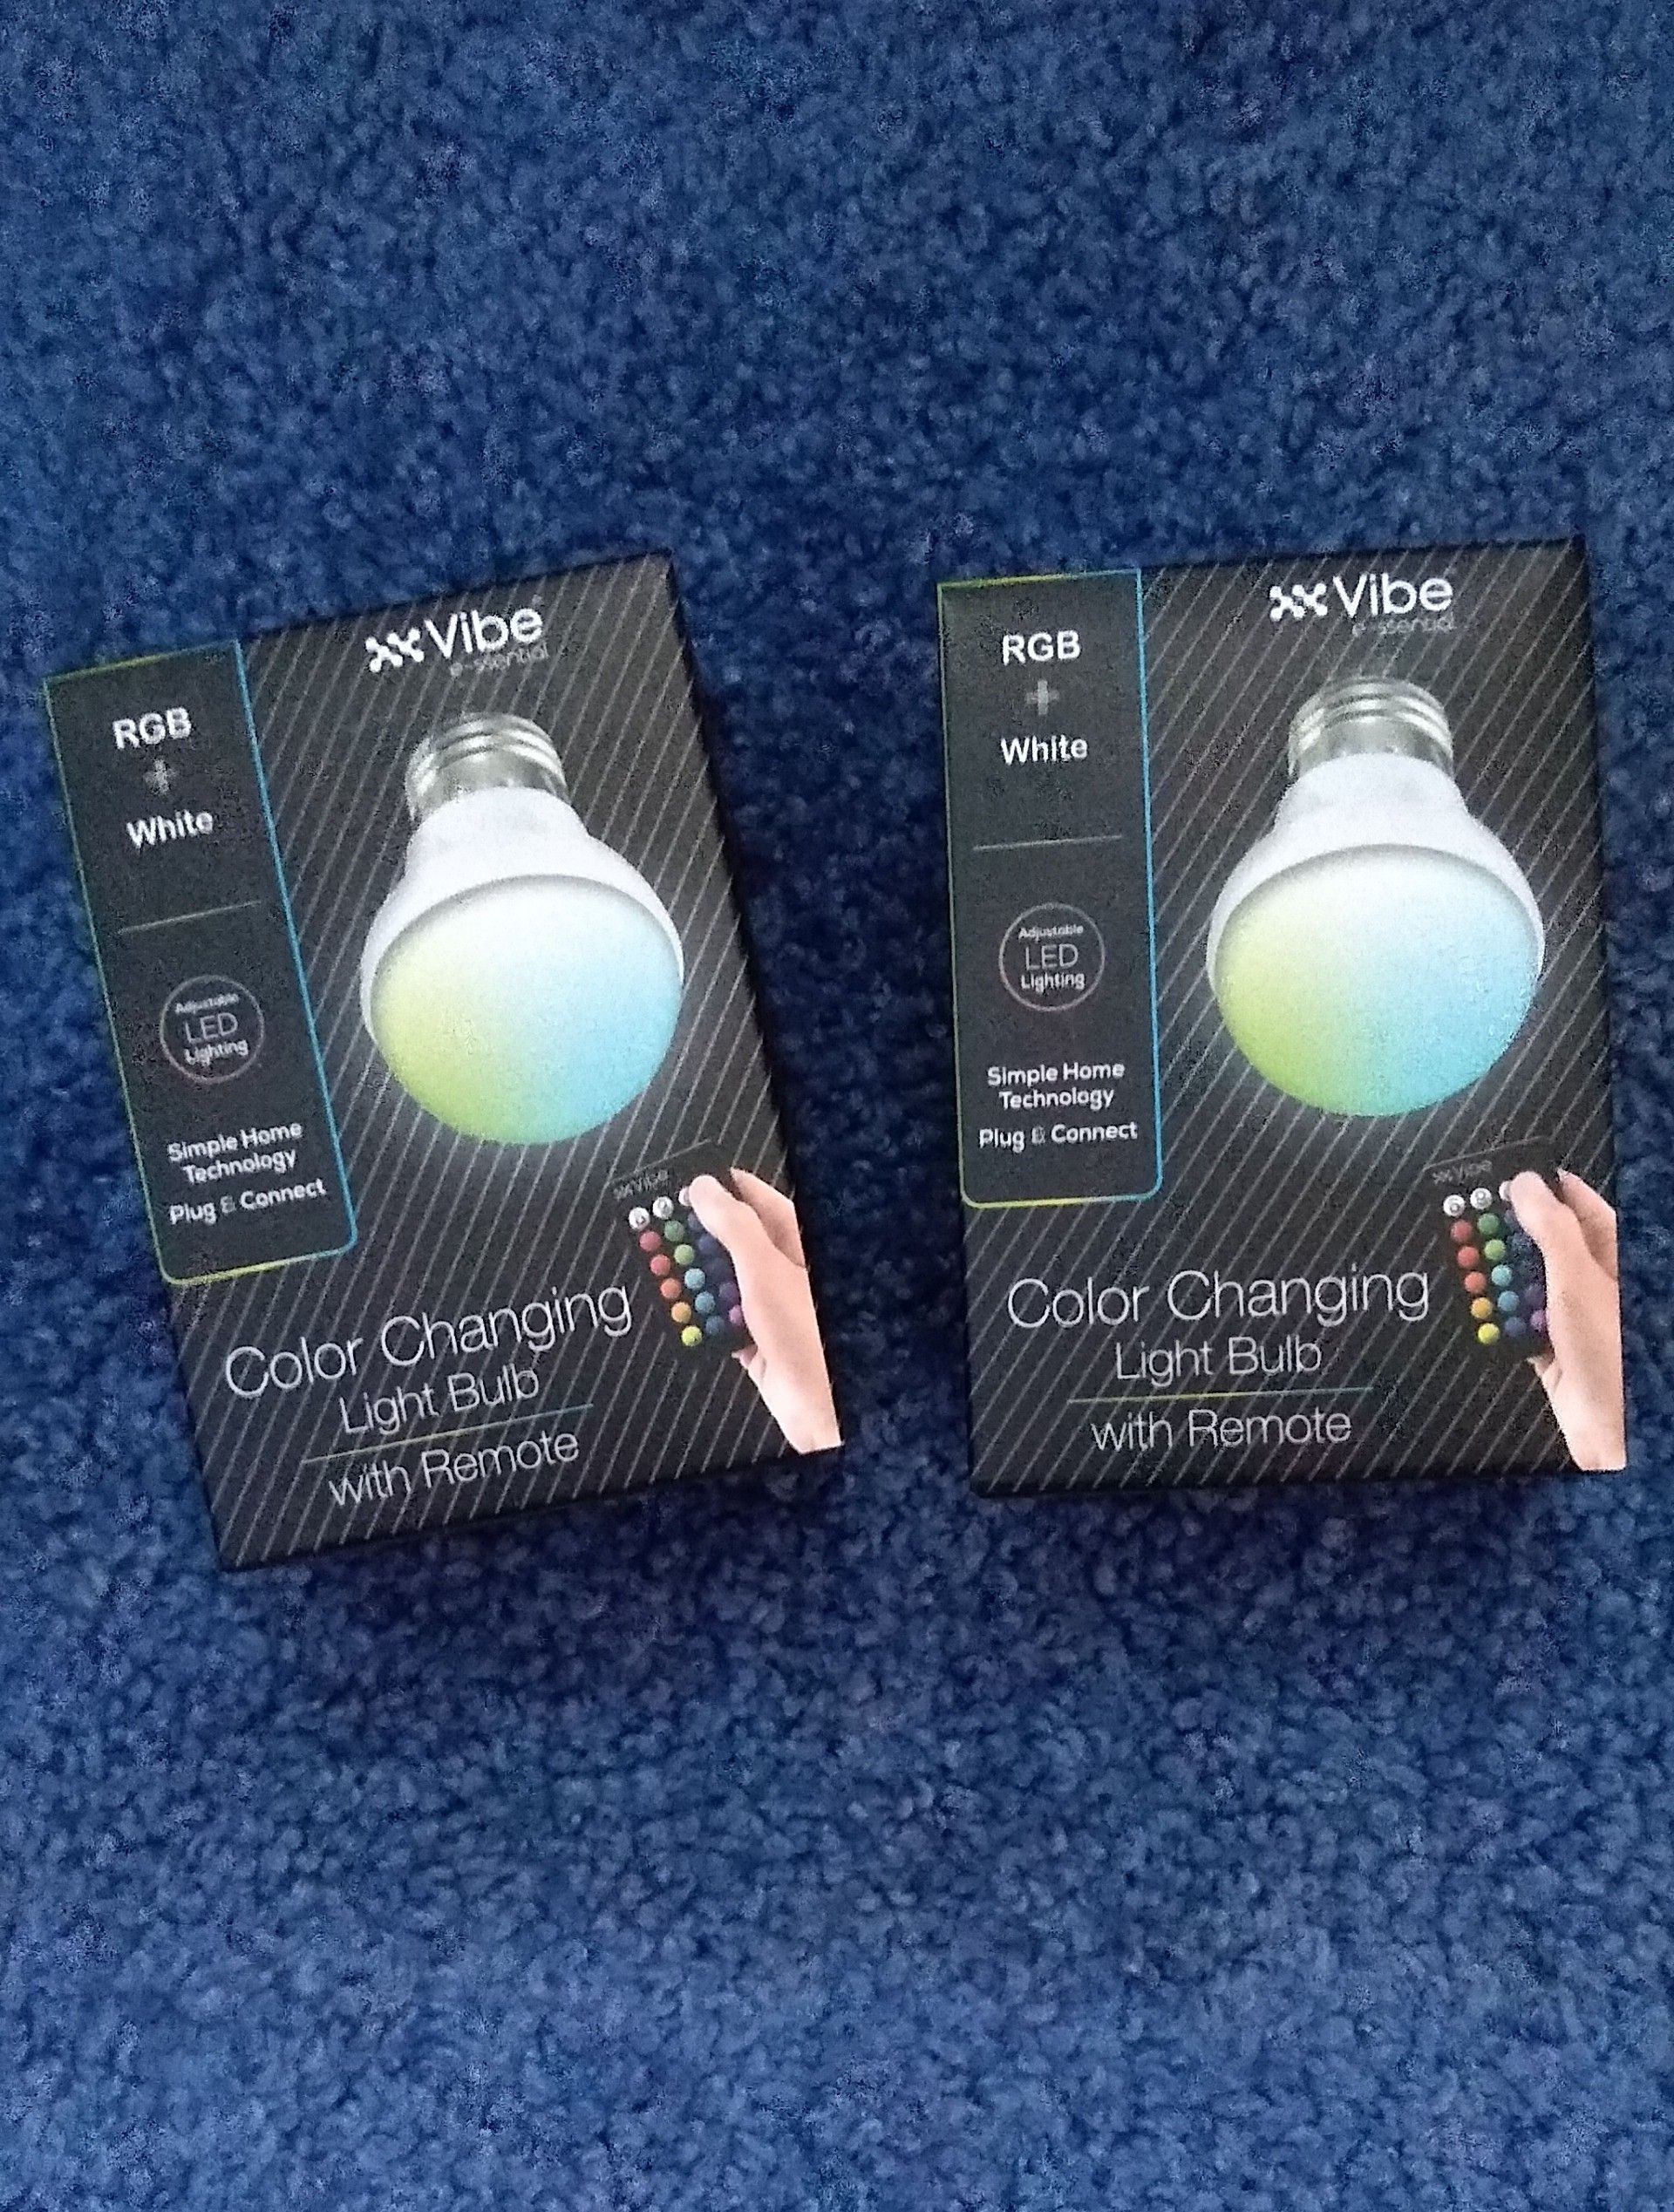 COLOR CHANGING LIGHT BULB WITH REMOTE CONTROL